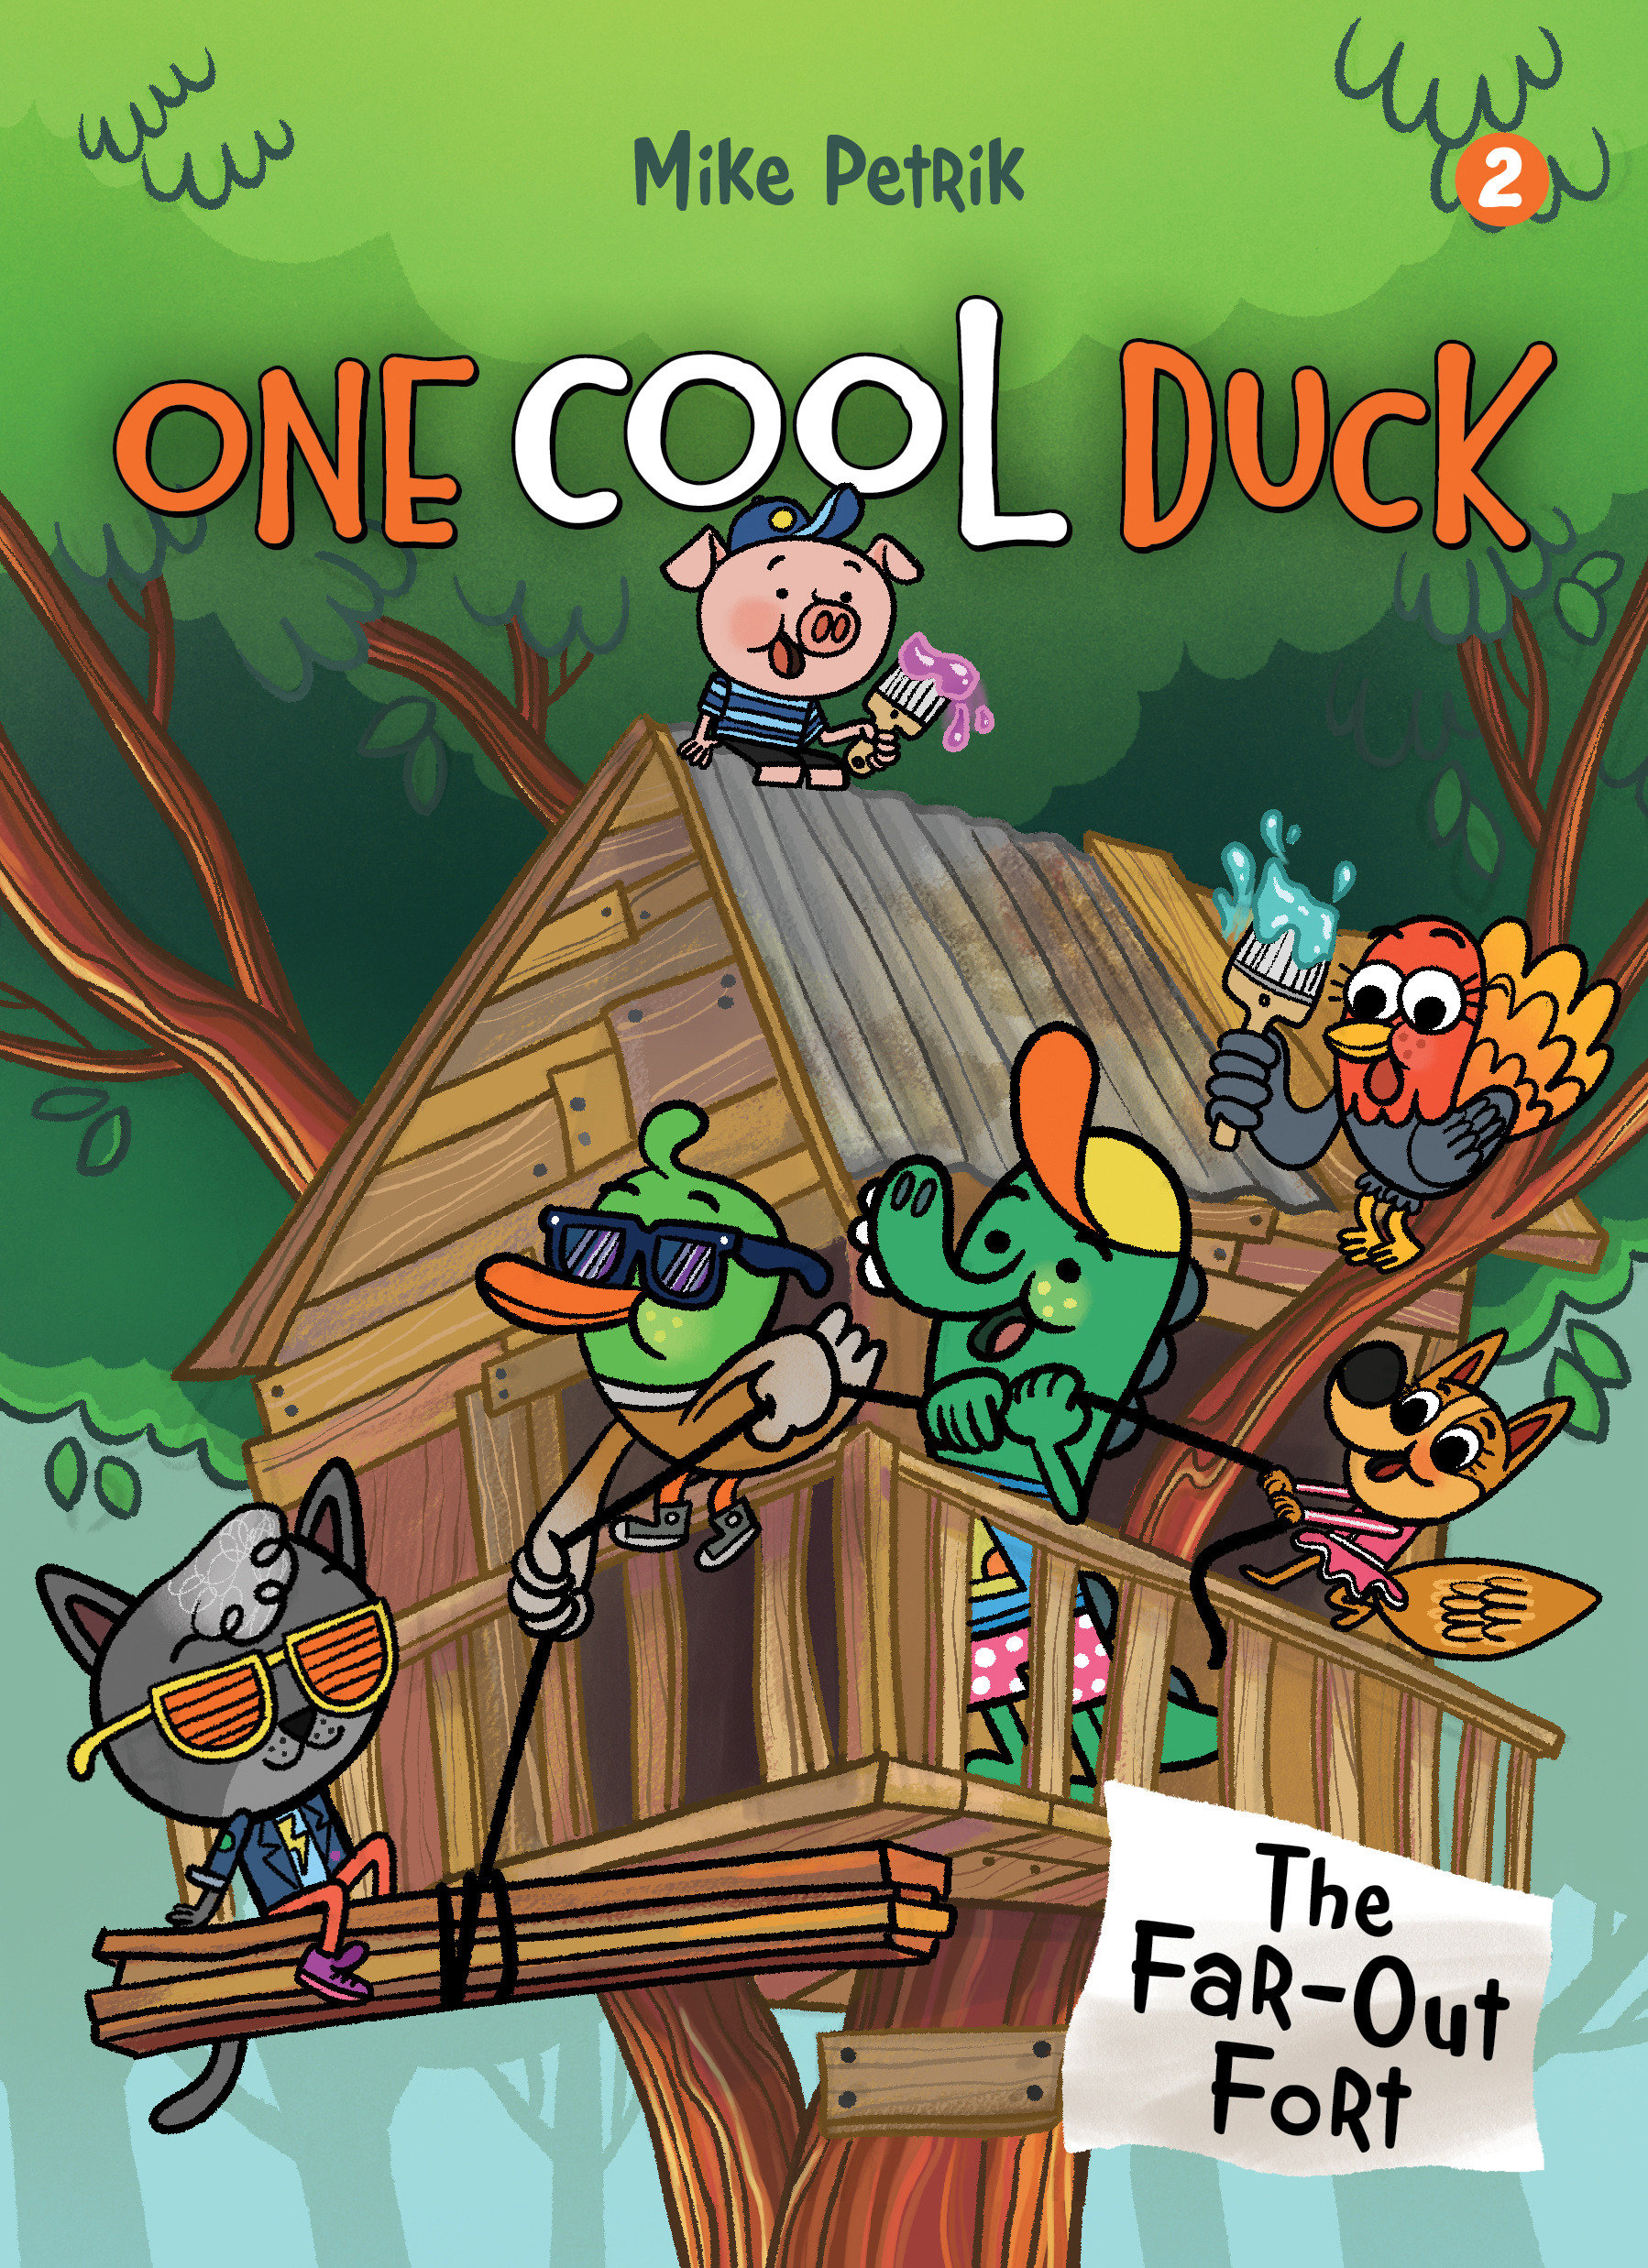 One Cool Duck Hardcover Graphic Novel Volume 2